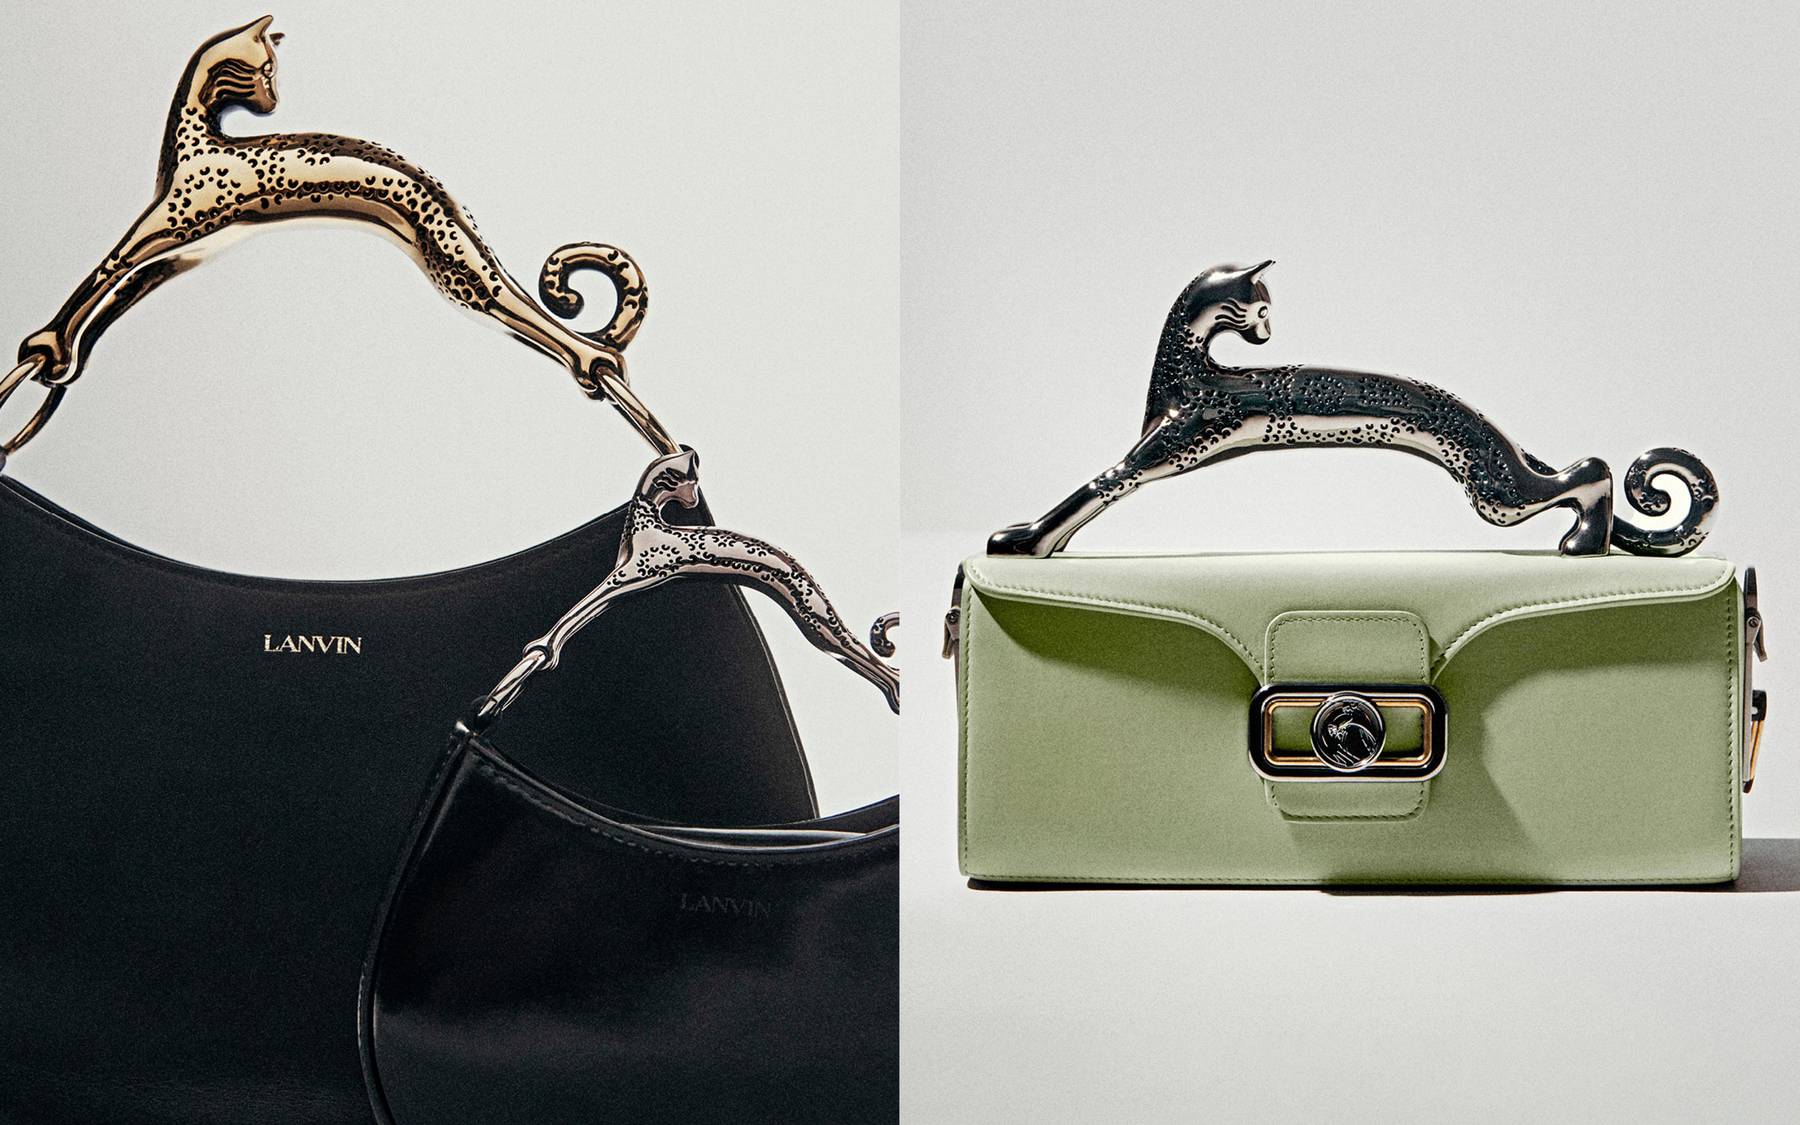 Two Lanvin purses in green and black with a cat-shaped handle.